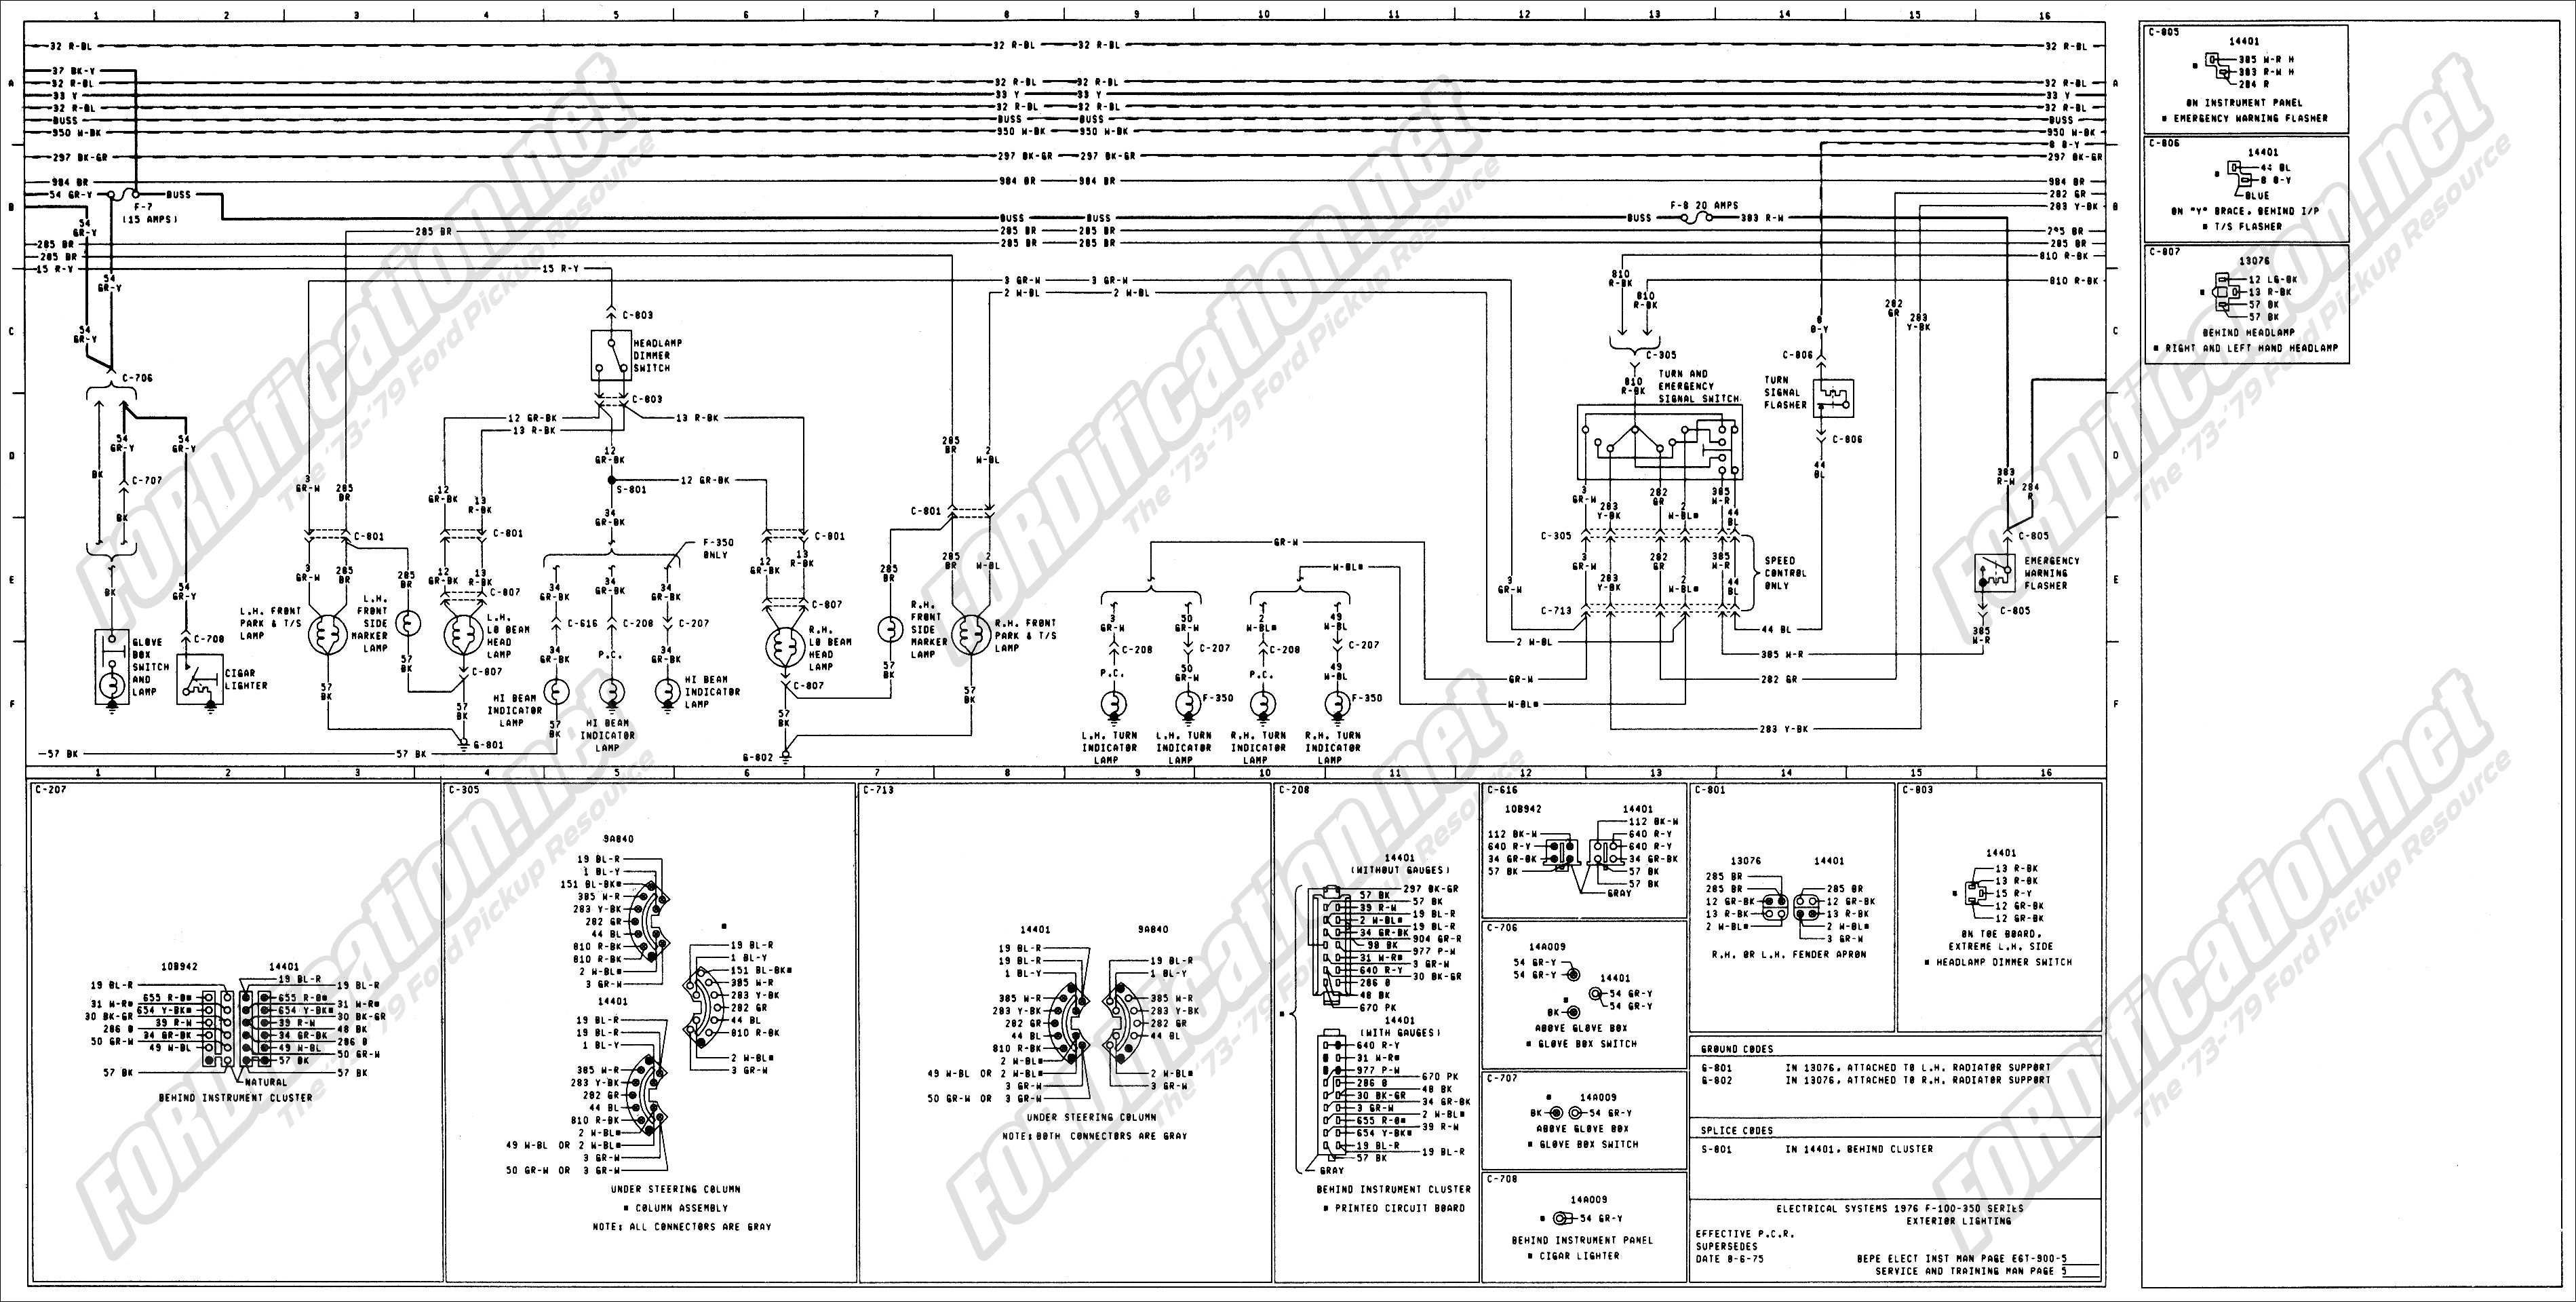 ford f150 trailer wiring harness diagram 77 ford f250 wiring diagram wiring info e280a2 of ford f150 trailer wiring harness diagram